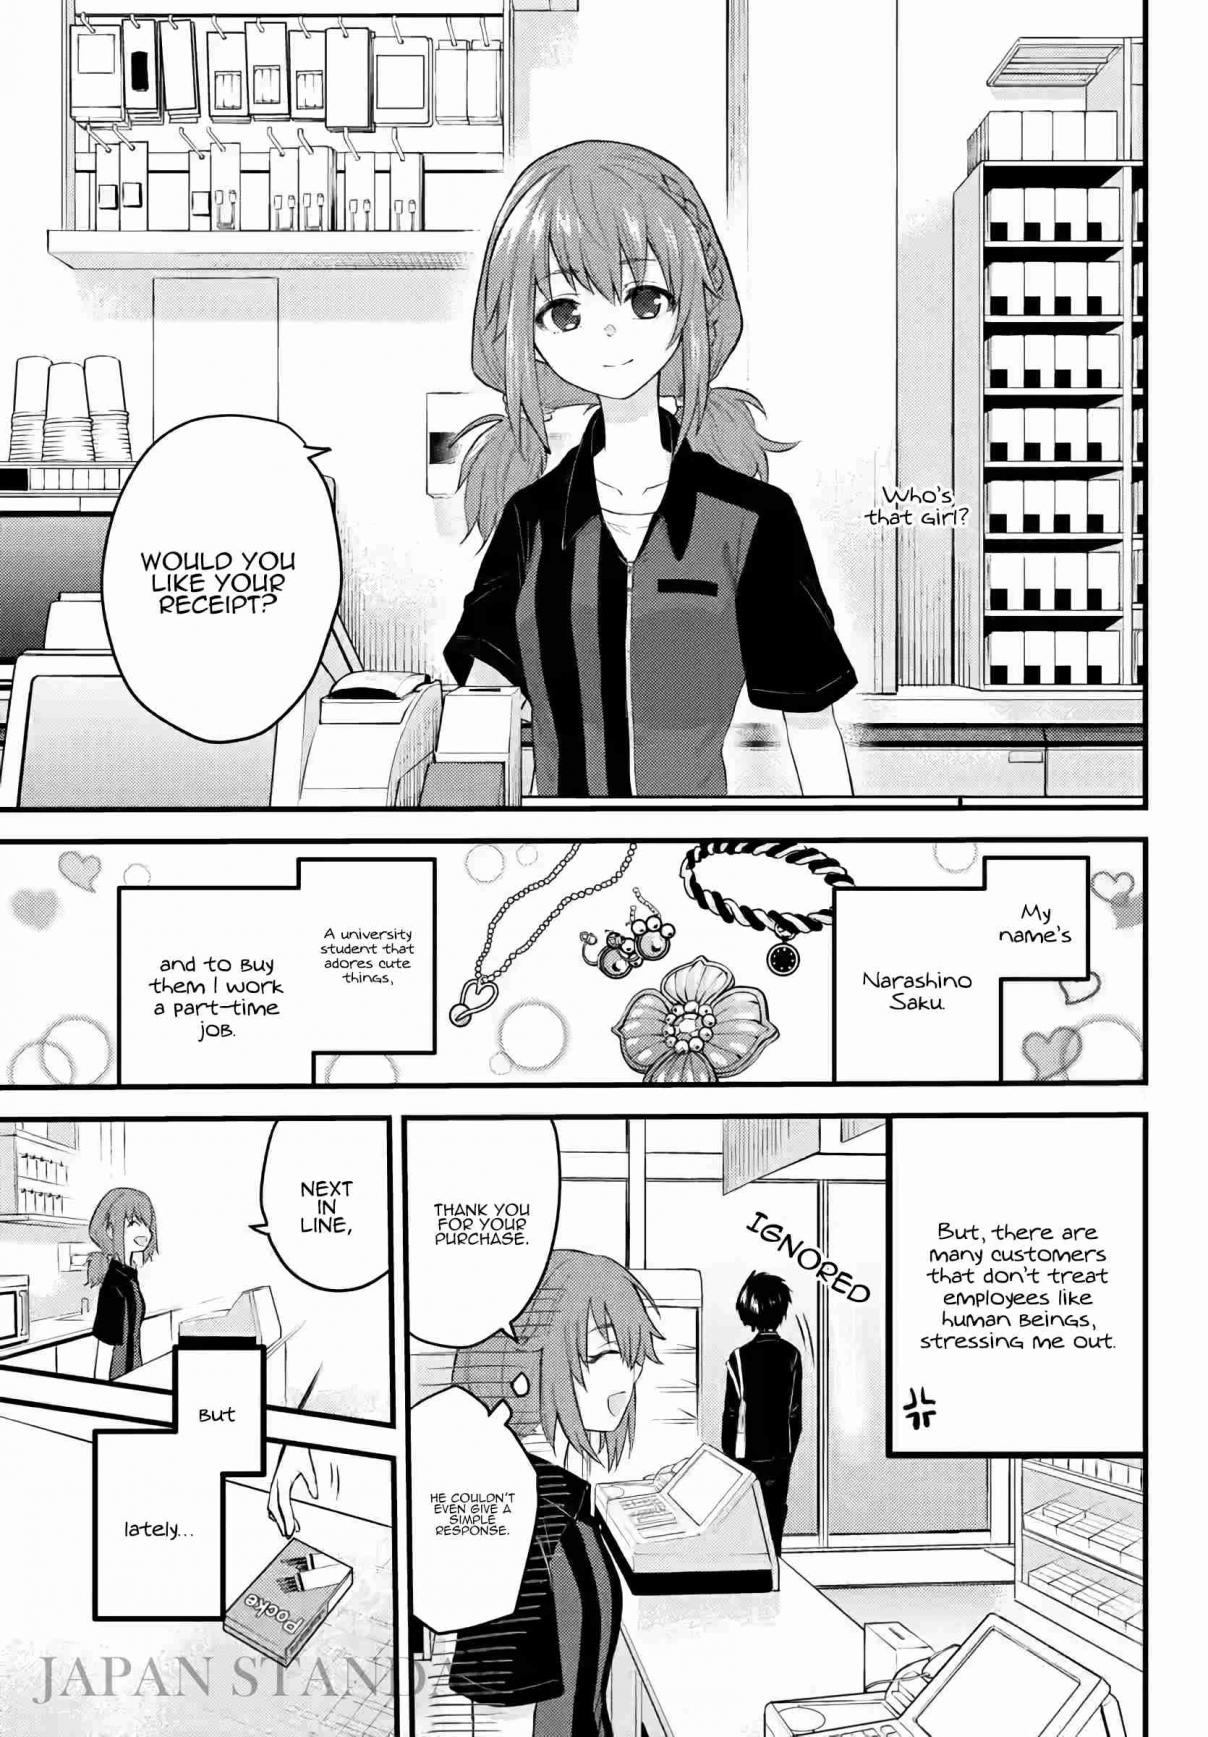 A Girl Who Can't Speak Thinks "She Is Too Kind." Vol. 1 Ch. 7 The Convenience Store Friend